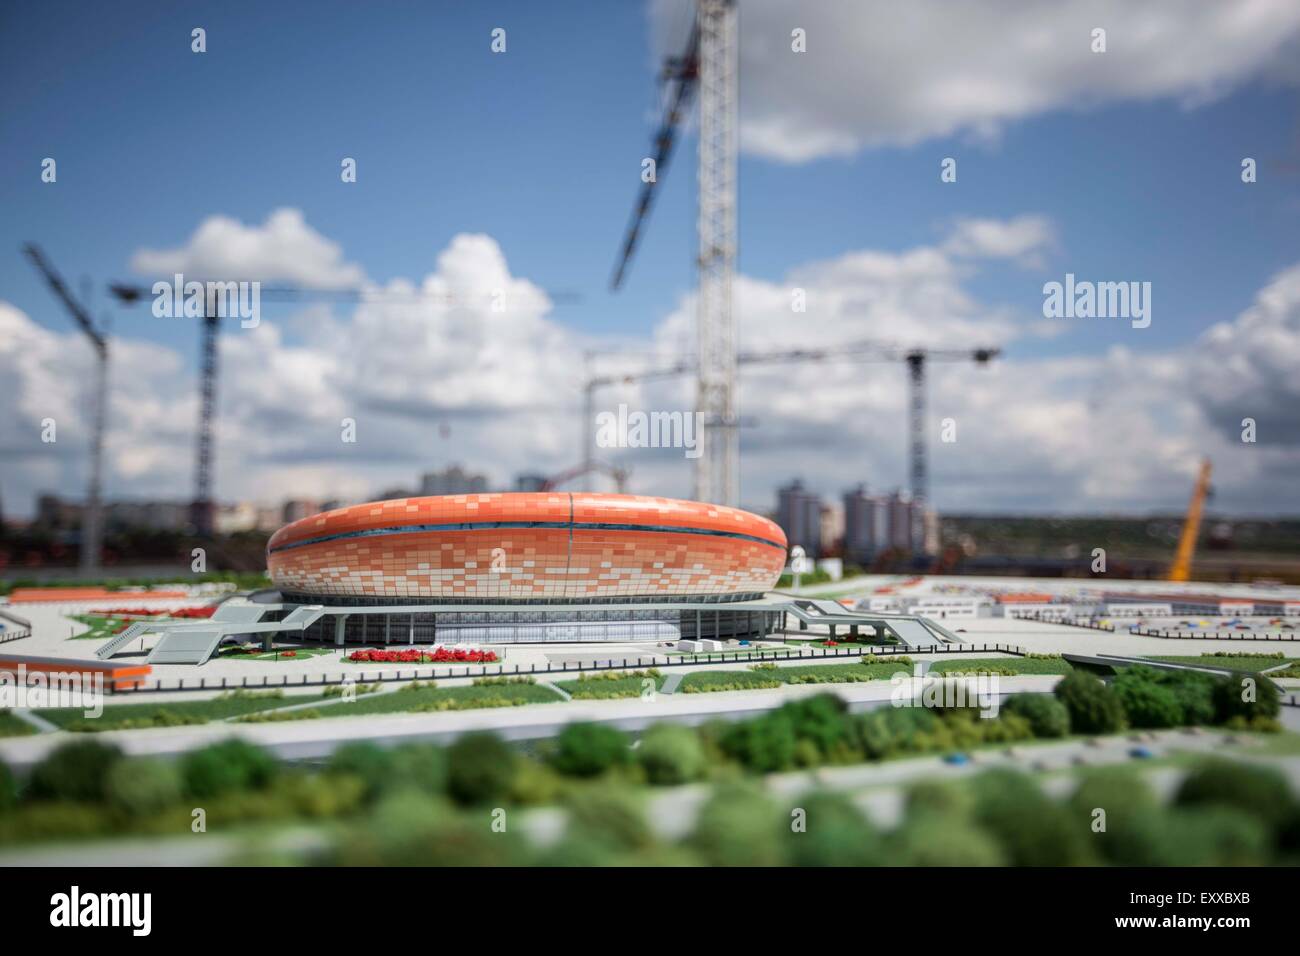 (150717) -- SARANSK, July 17, 2015 (XINHUA) -- Photo taken on July 17, 2015 shows the model seen at the construction site of the Mordovia Arena in Saransk, Russia. Russia will host the FIFA World Cup soccer tournament in 2018. (Xinhua/Li Ming)(wll) Stock Photo